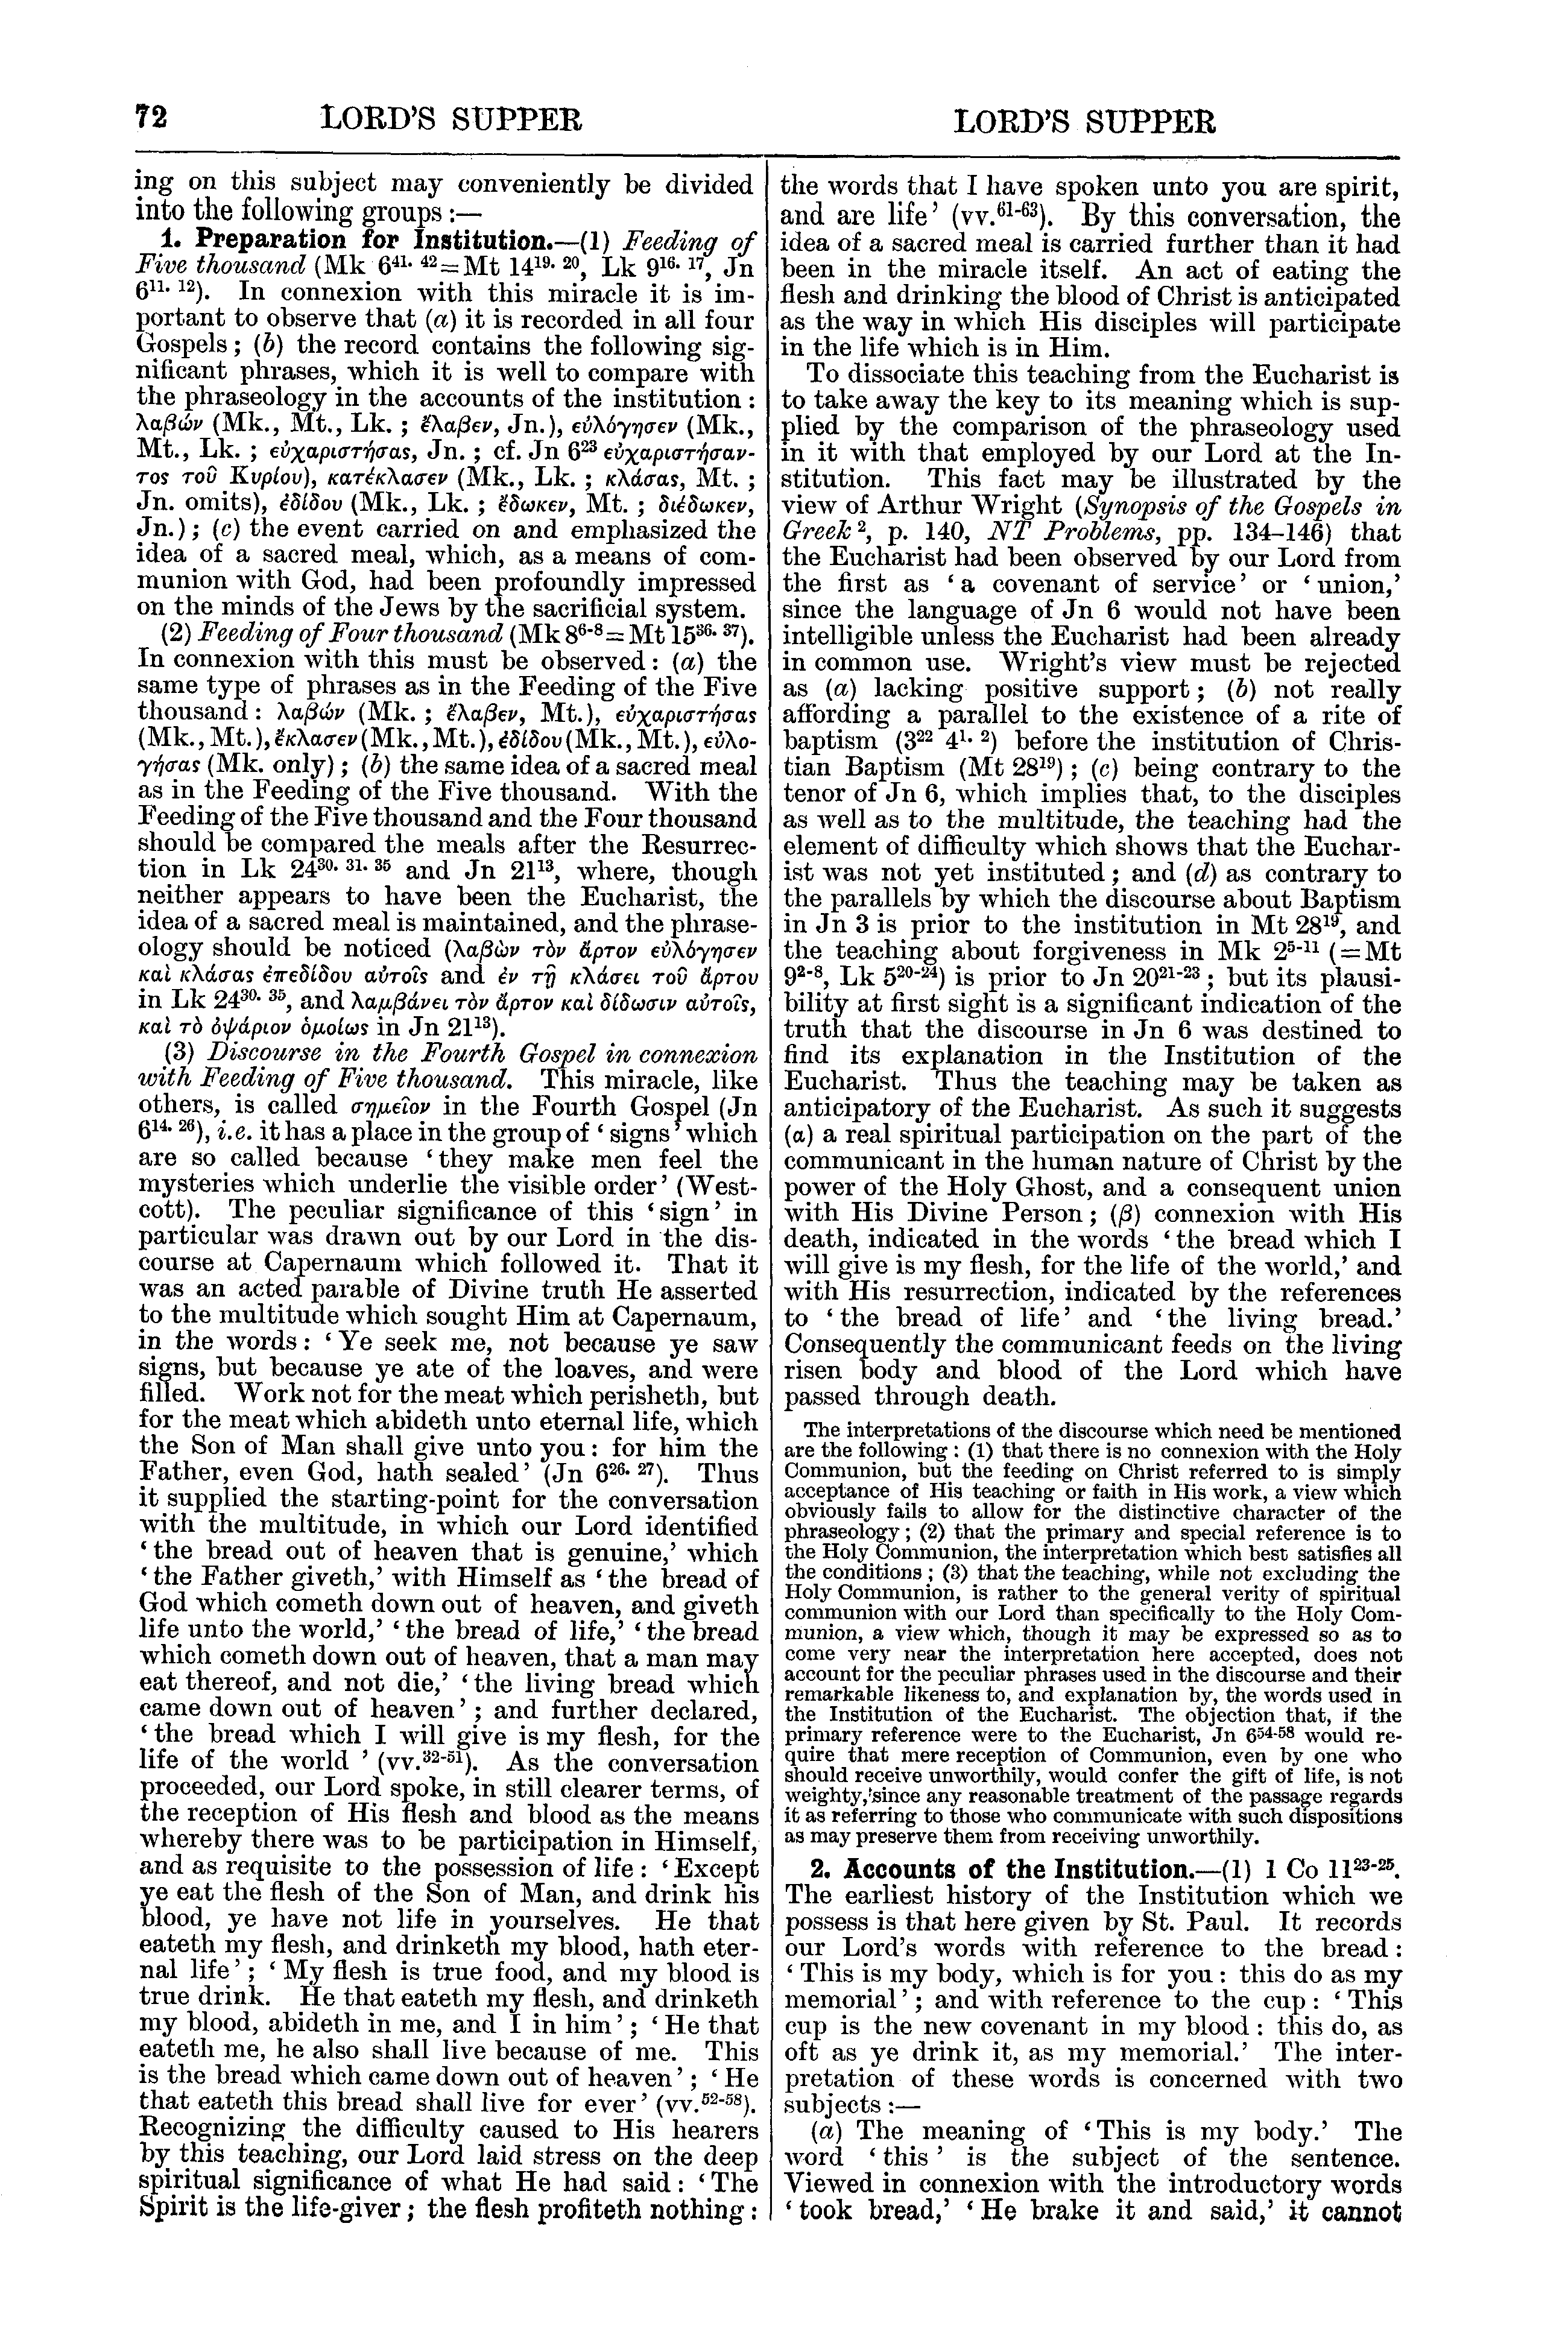 Image of page 72